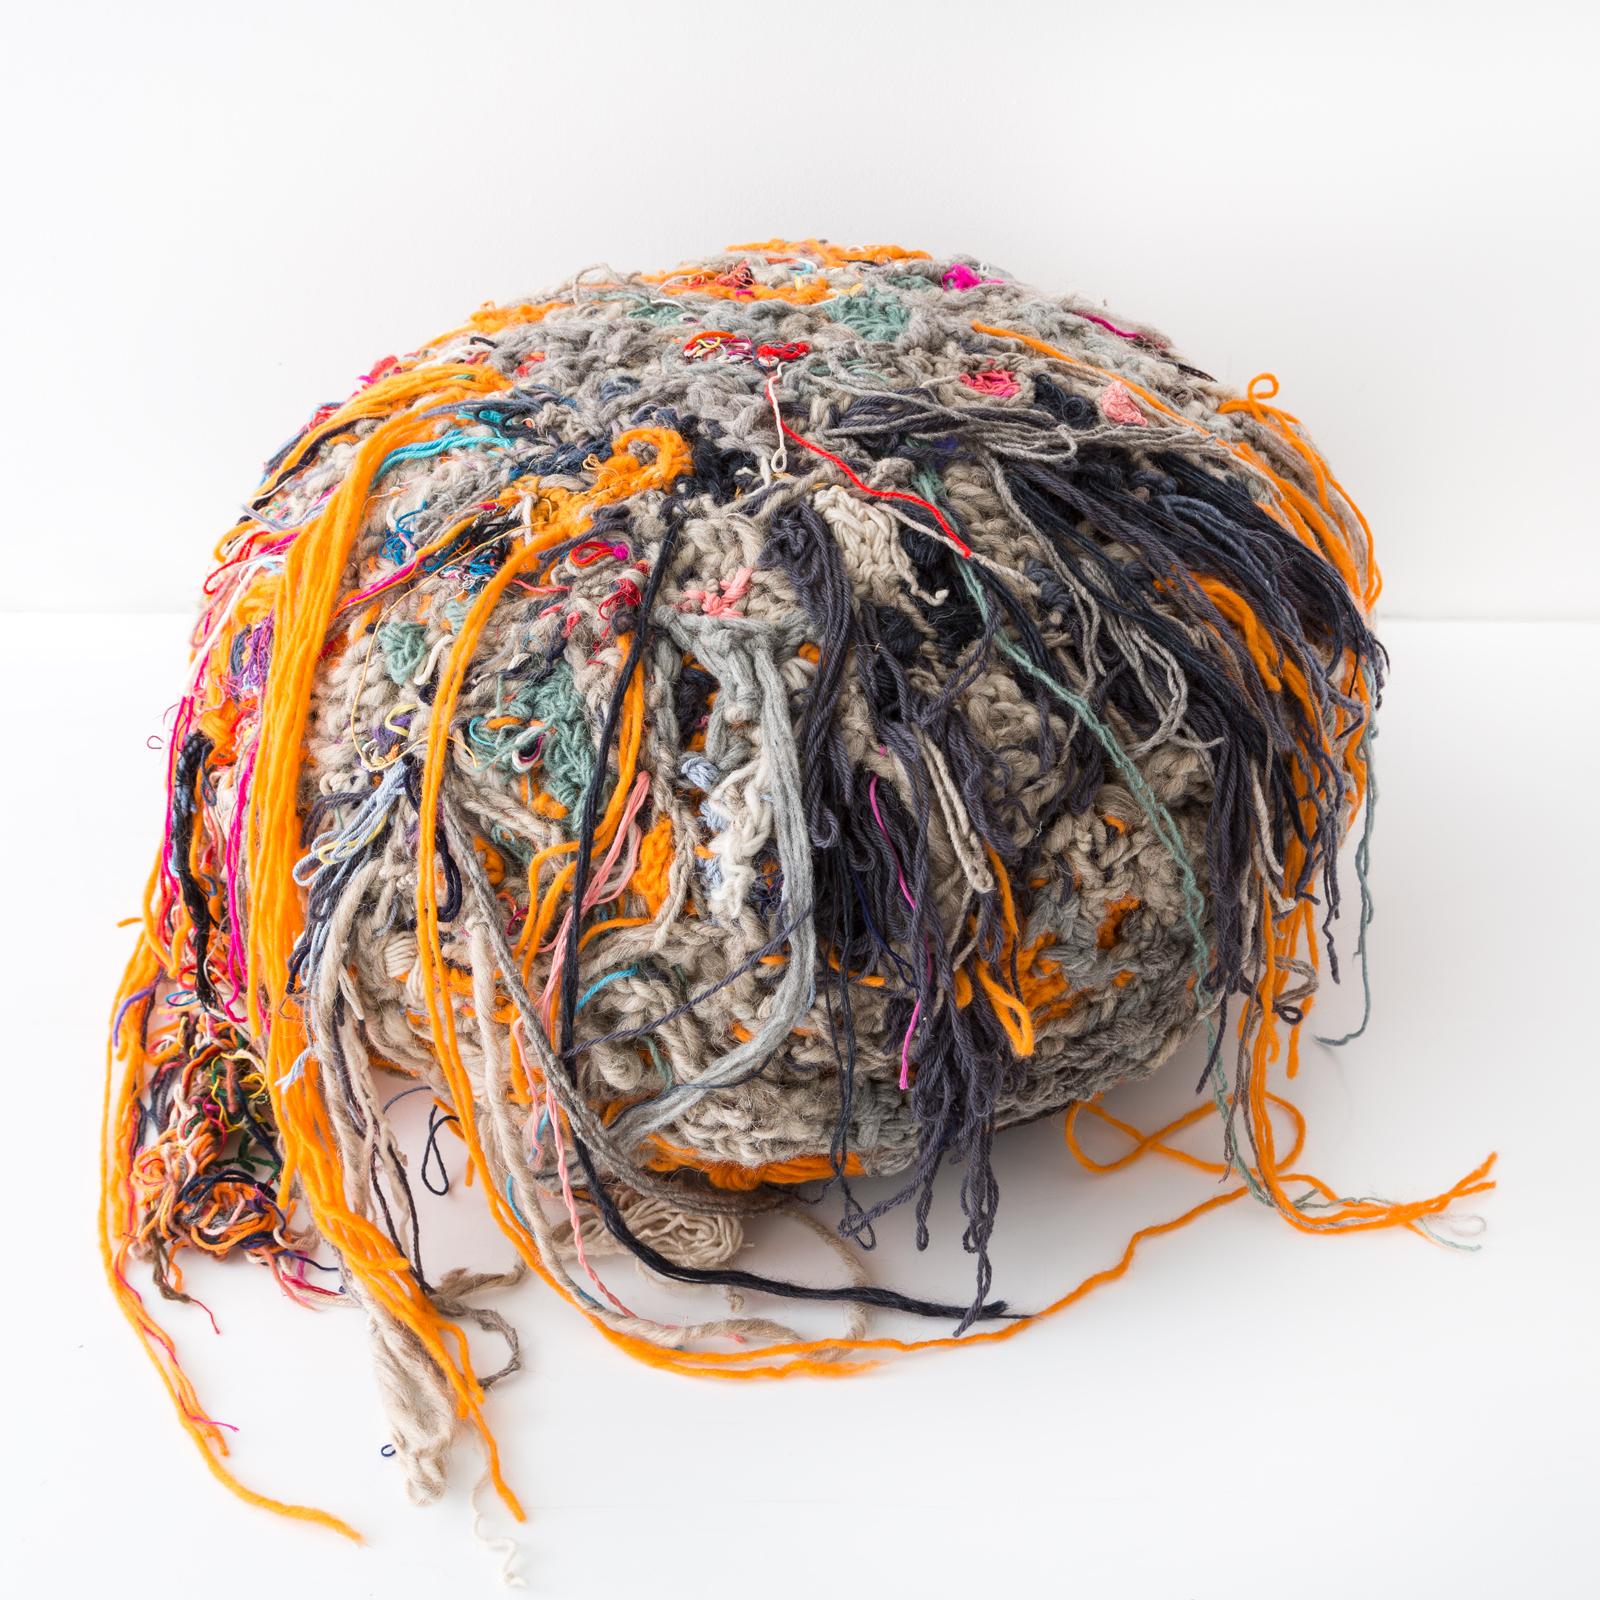 Further Forms are a grouping of bright and hairy ottomans that have creature-like qualities. Tamika Rivera sculpts the Forms by wrapping, knitting and knotting yarn and string onto stuffed geometric forms. She builds off these forms to create this